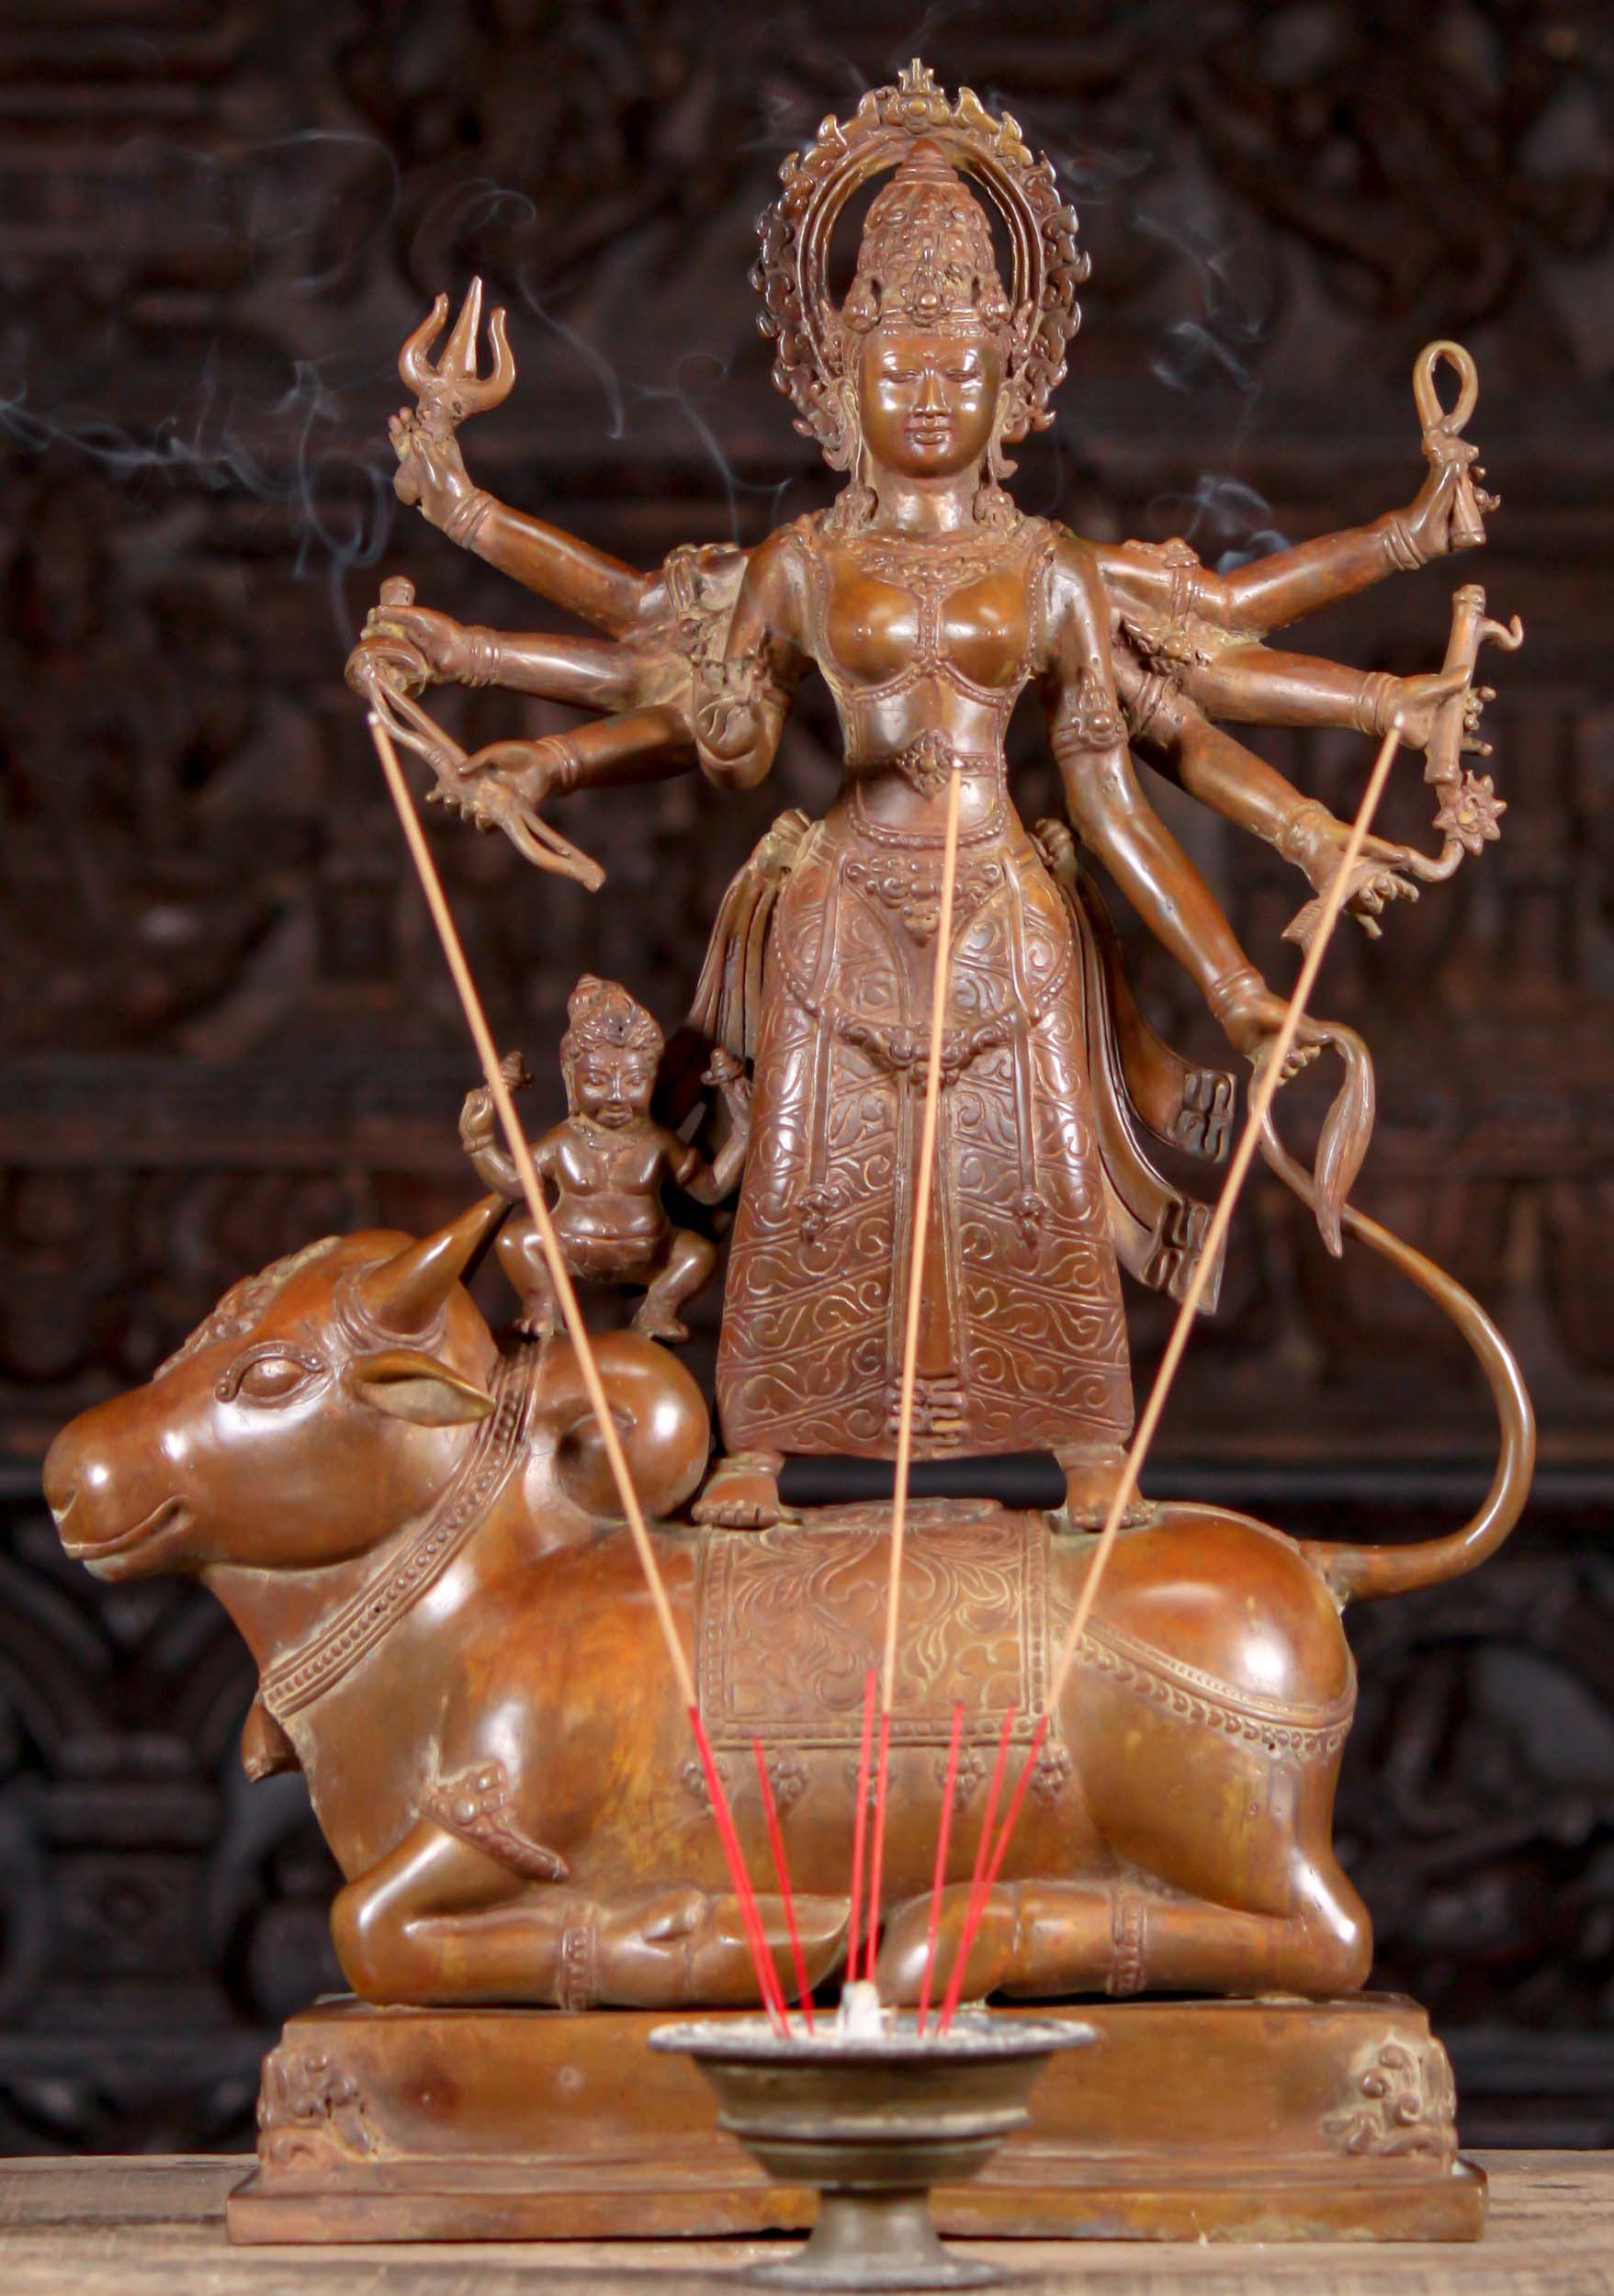 https://www.lotussculpture.com/mm5/graphics/00000001/49/1-copper-colored-brass-durga-statue-on-bull-with-8-arms-sculpture-c.jpg